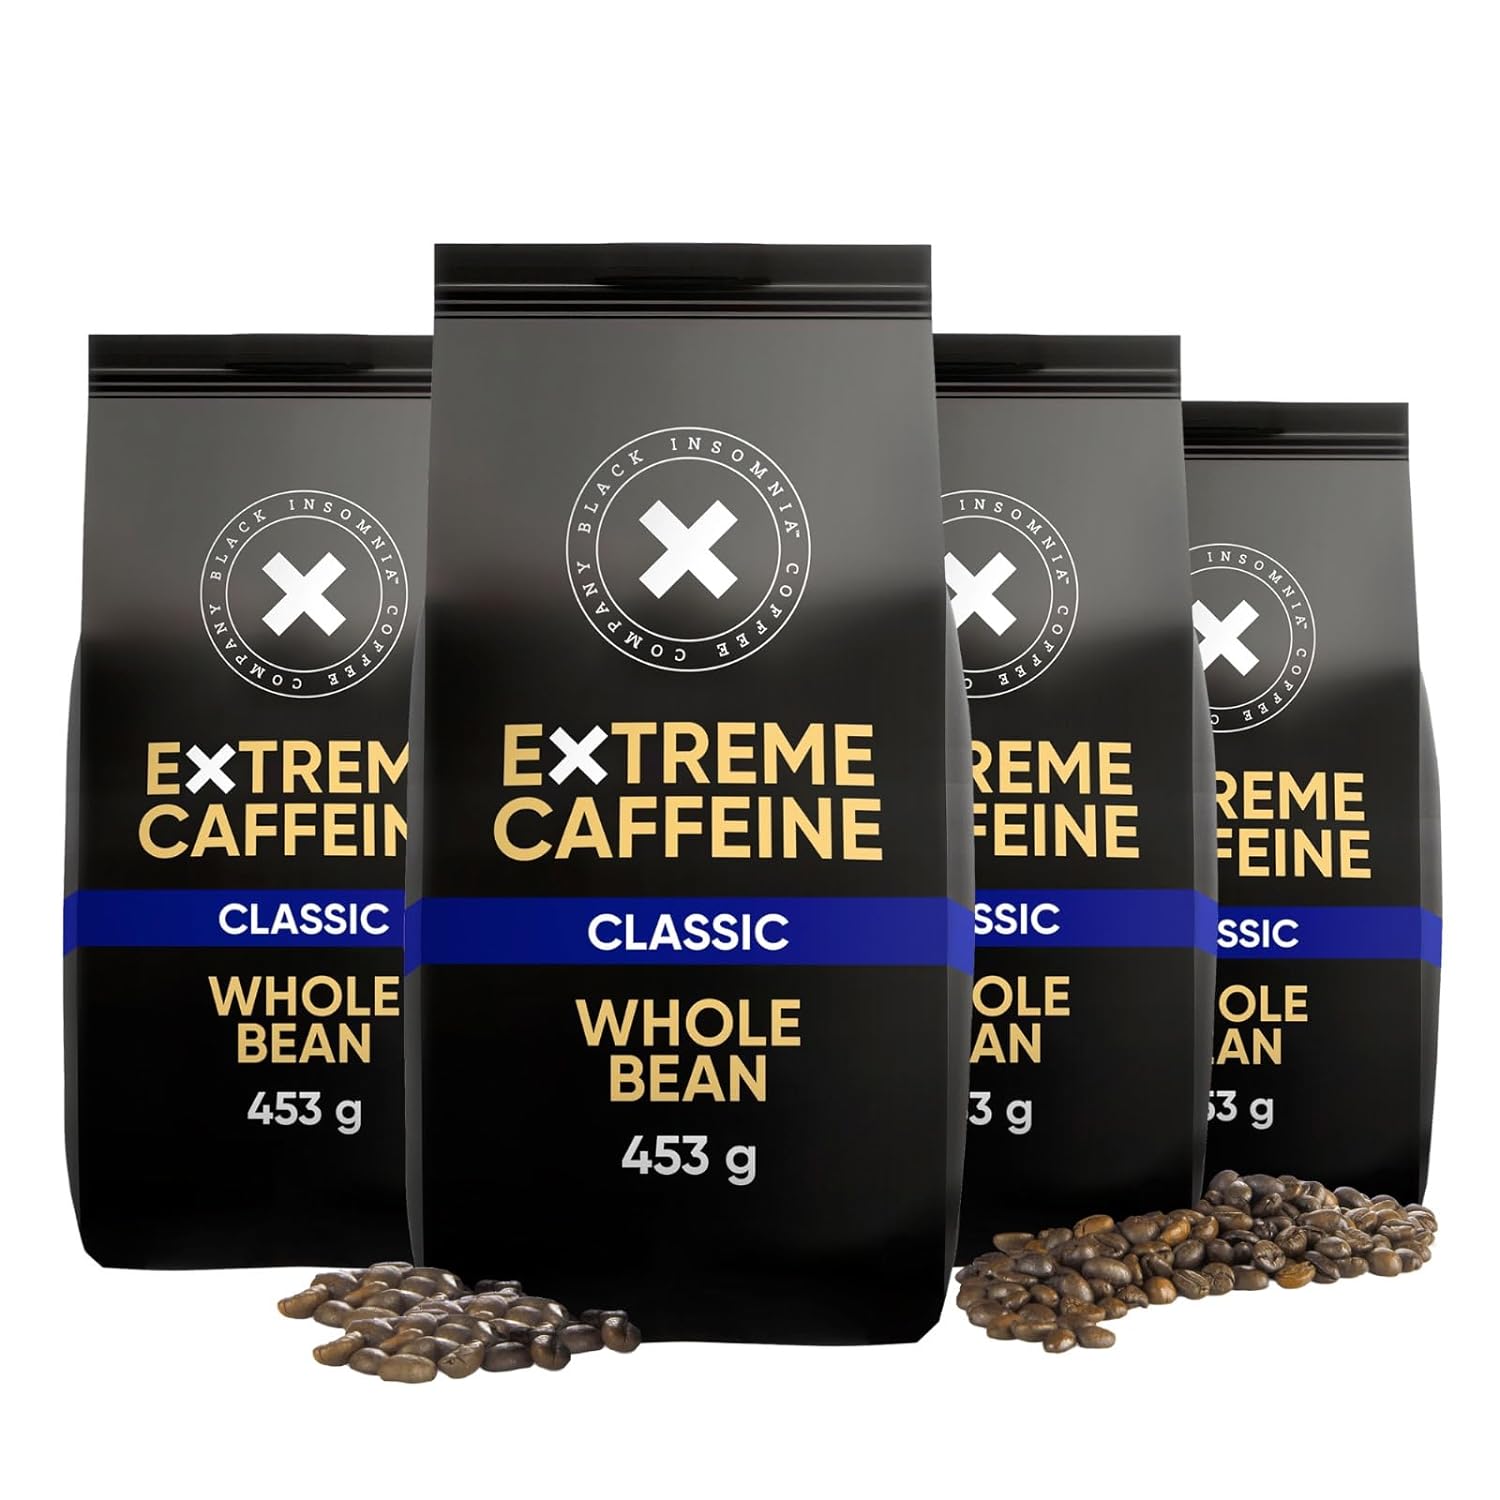 4 x Black Insomnia coffee beans extra strong I 1105mg caffeine per cup - strongest coffee in the world I 100% Robusta beans I Classic, medium roast, low acidity I 4 x 453g (Classic, 4 x 453g)